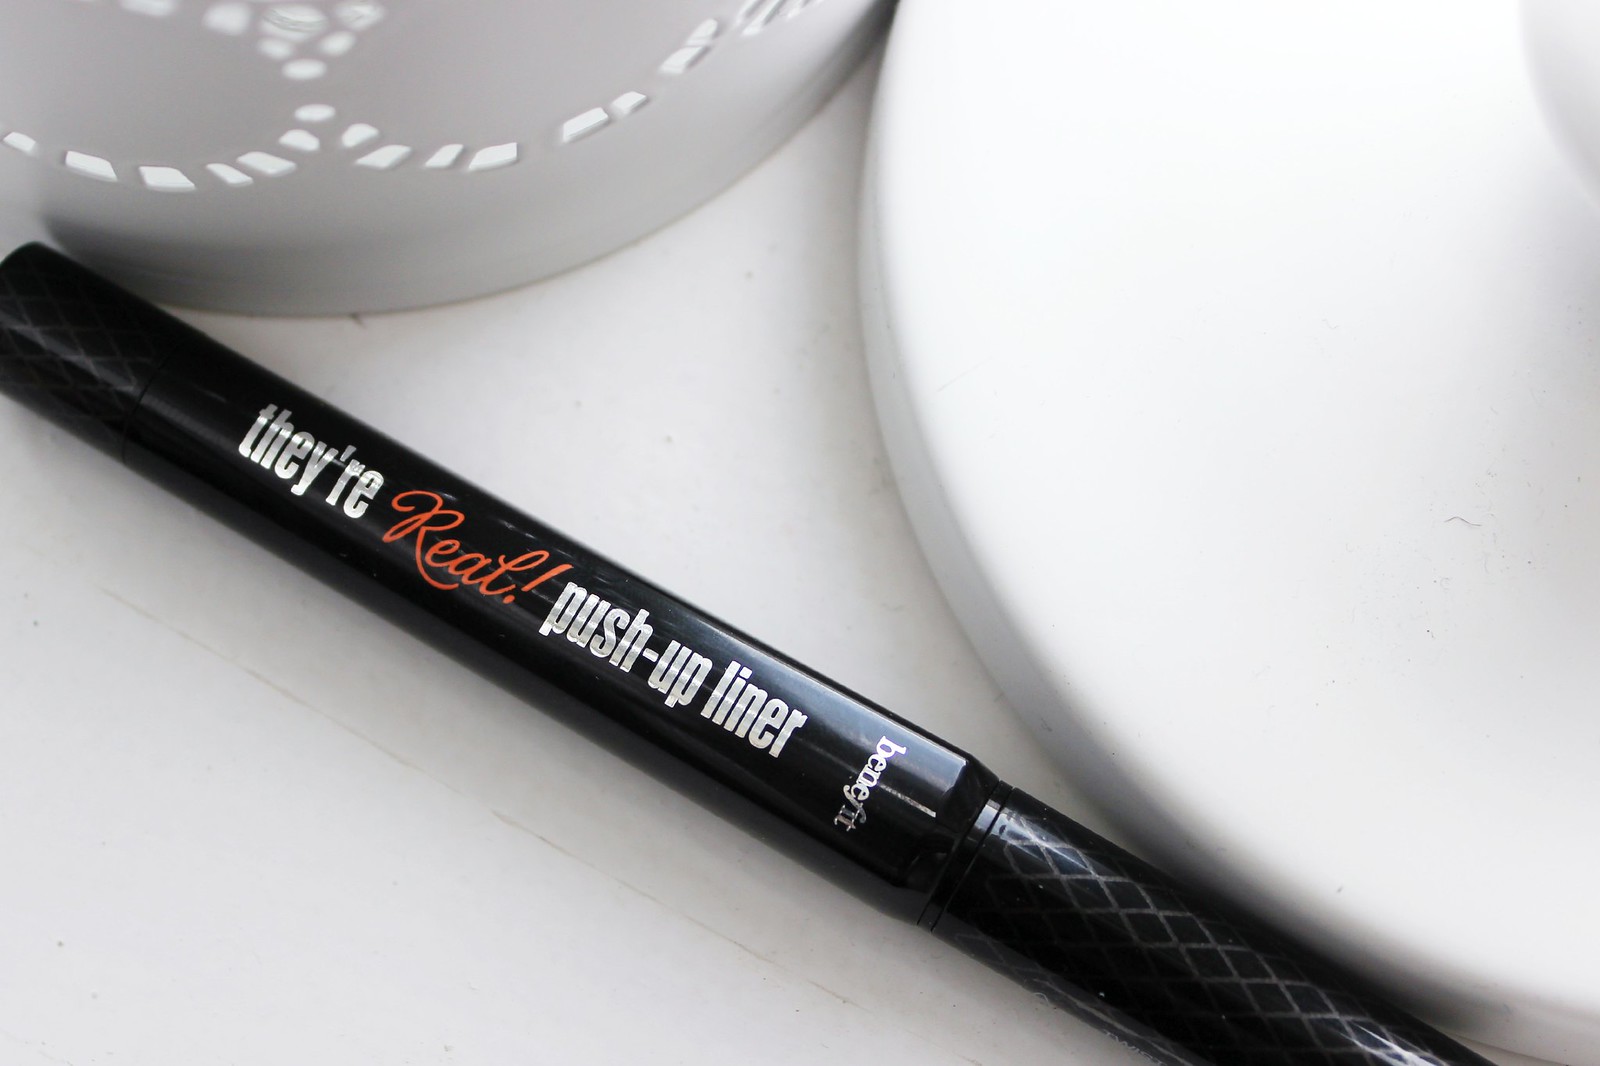 Benefit They're Real! Push Up Liner 3